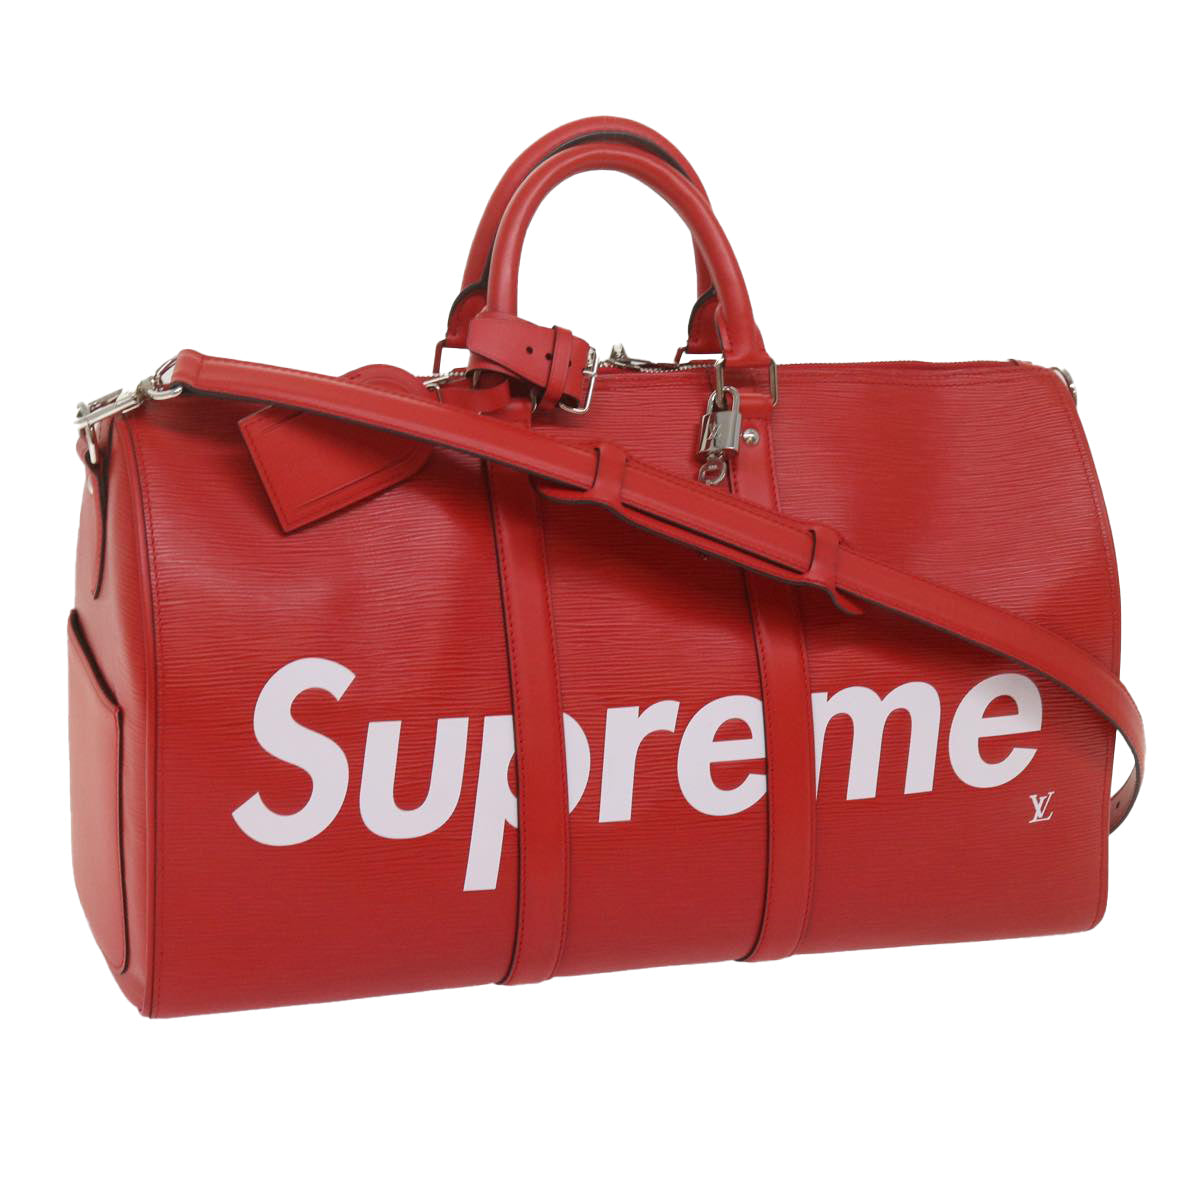 LOUIS VUITTON Epi Supreme Keepall Bandouliere 45 Bag Red M53419 LV Auth 69102S